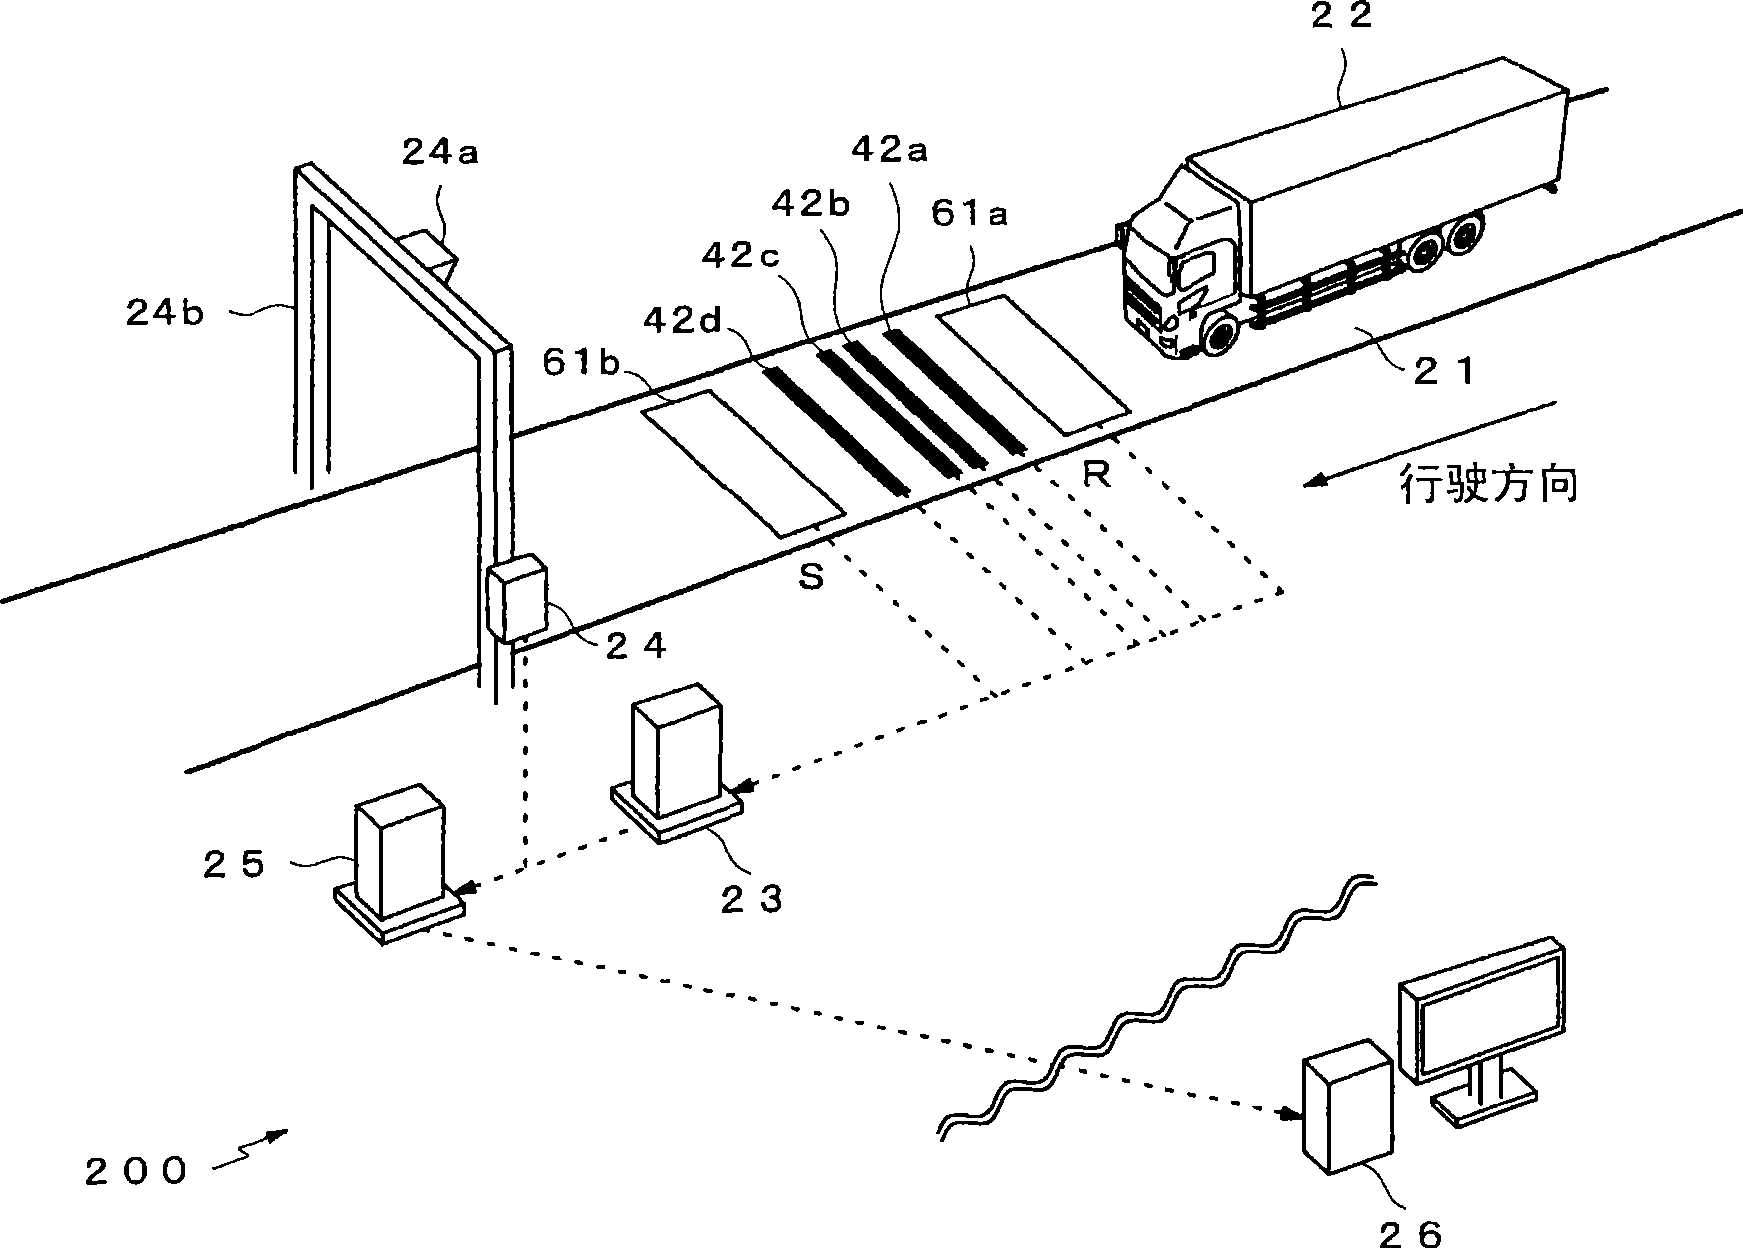 Axle load measuring system and vehicle separating method